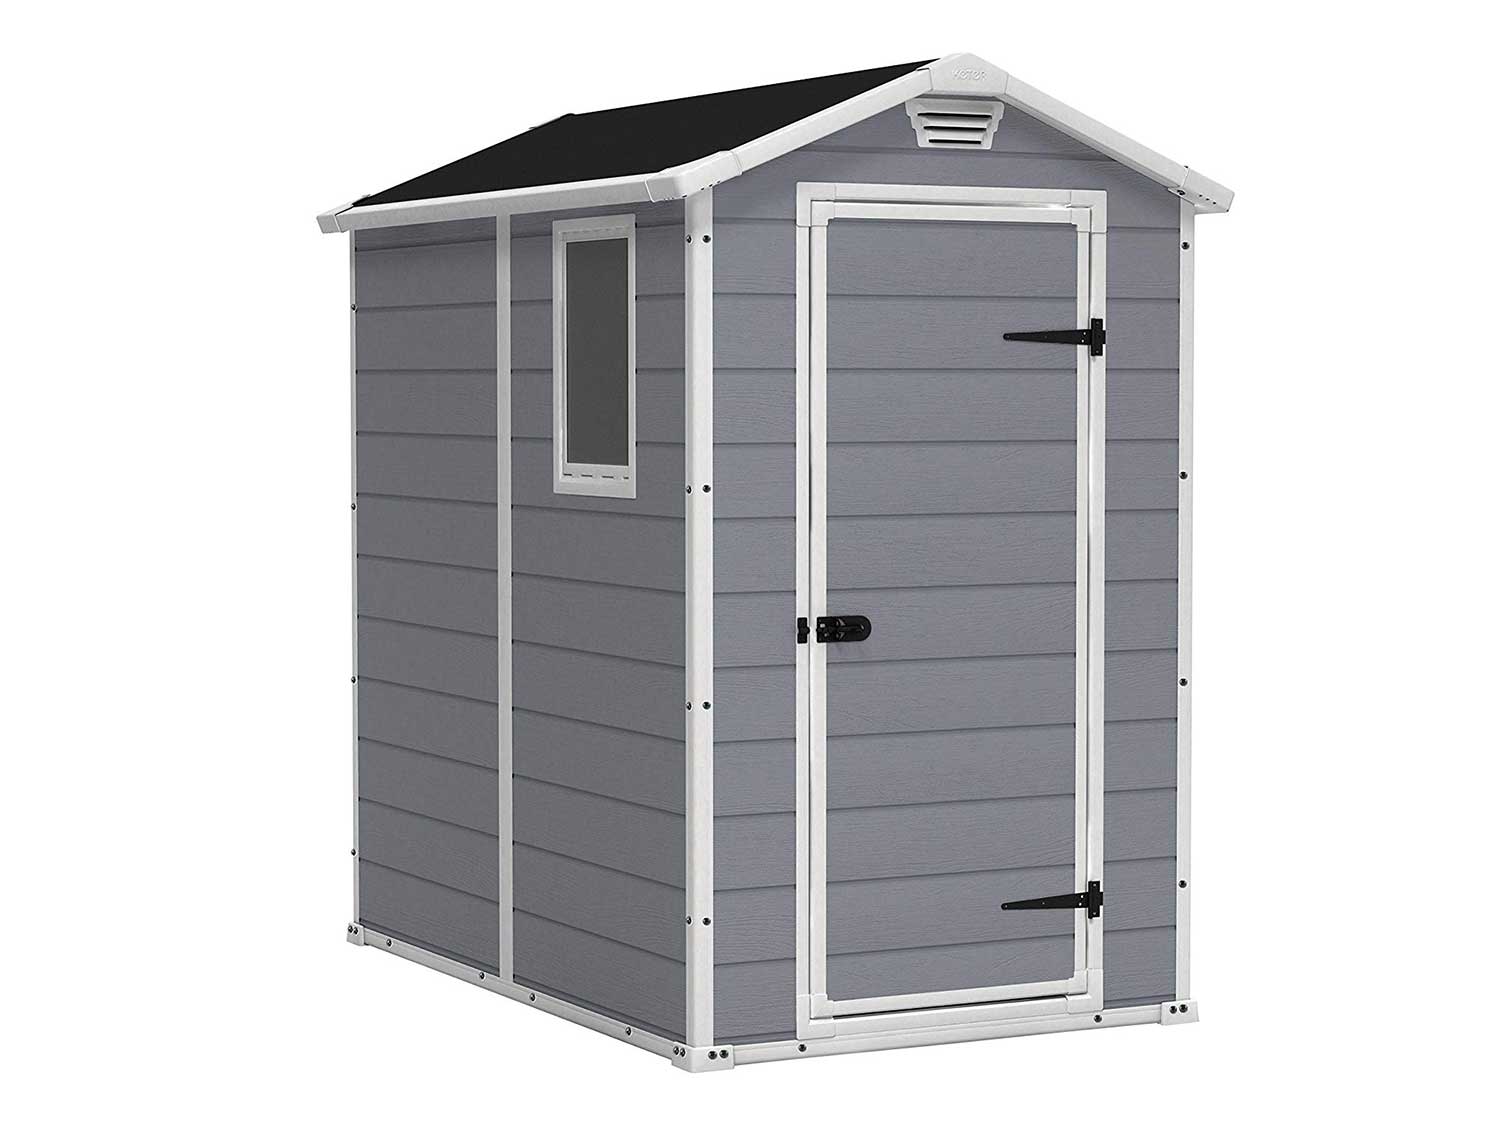 Keter Manor Large 4 x 6 ft. Resin Outdoor Backyard Garden Storage Shed